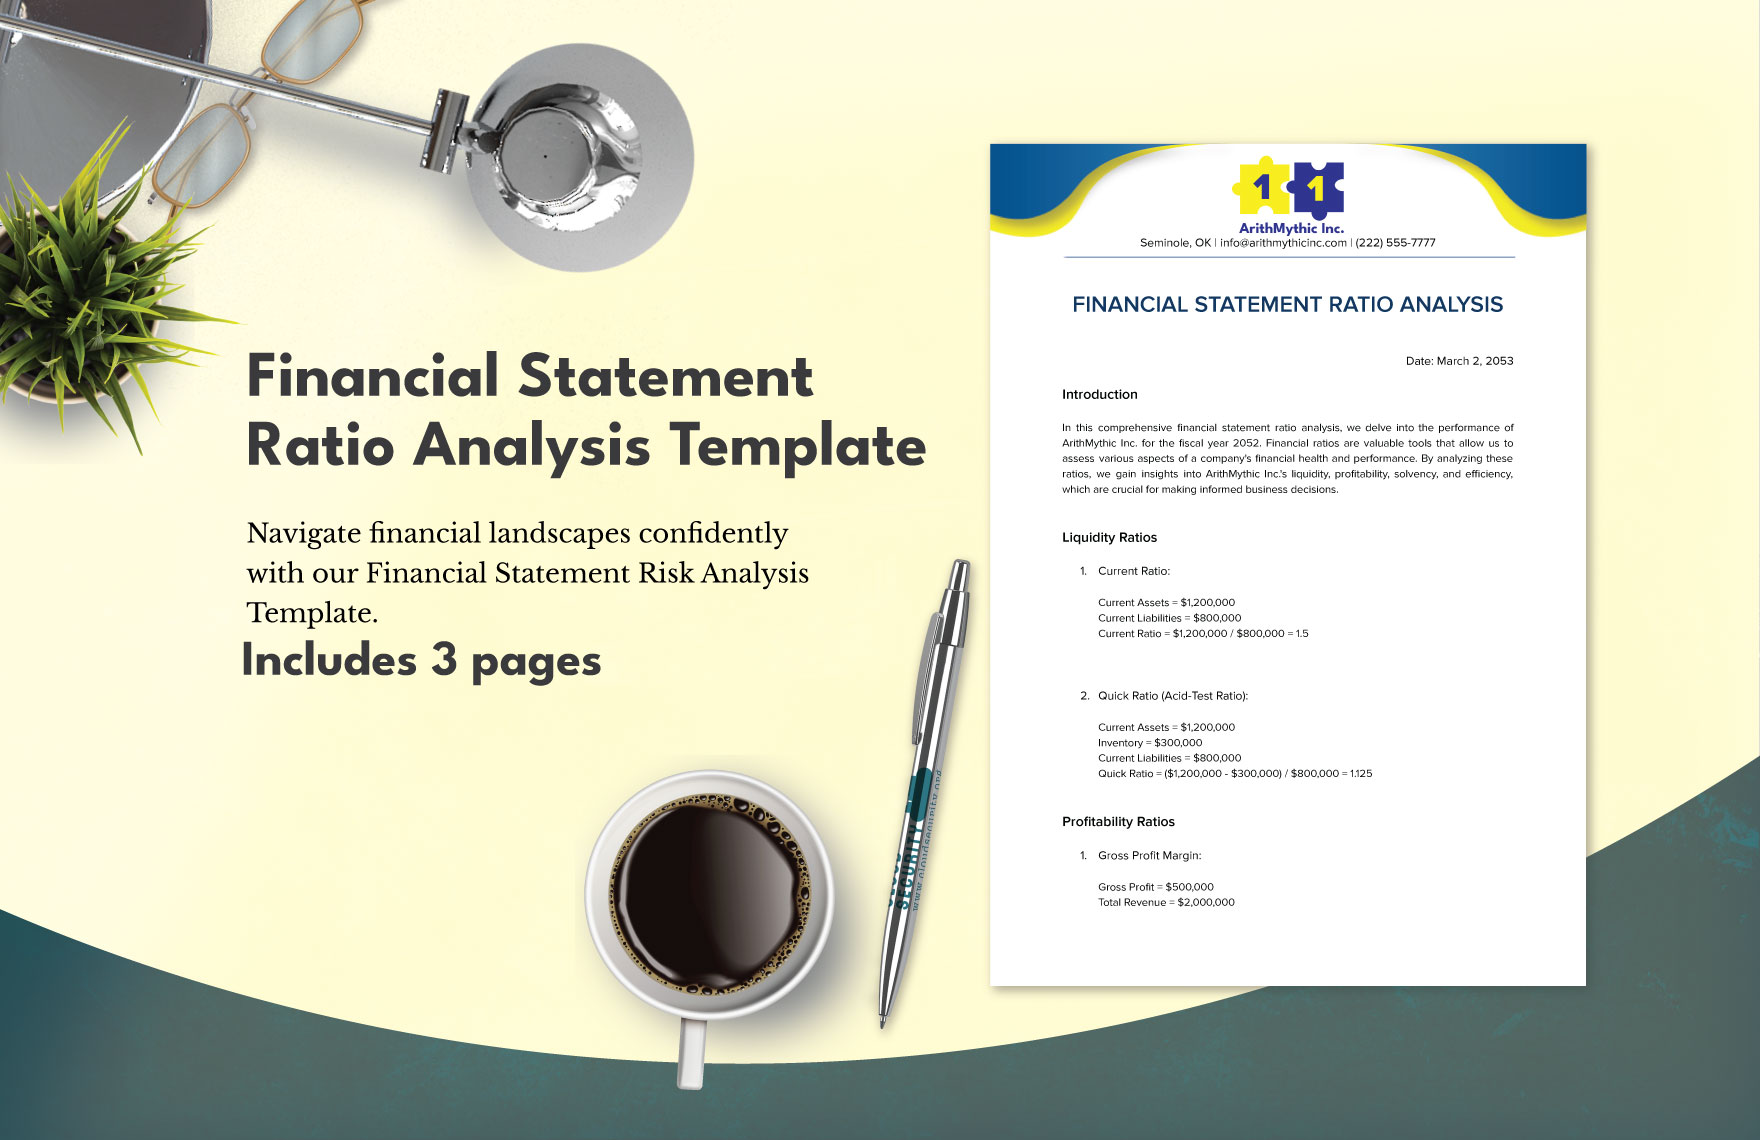 Financial Statement Ratio Analysis Template in Word, Google Docs, PDF